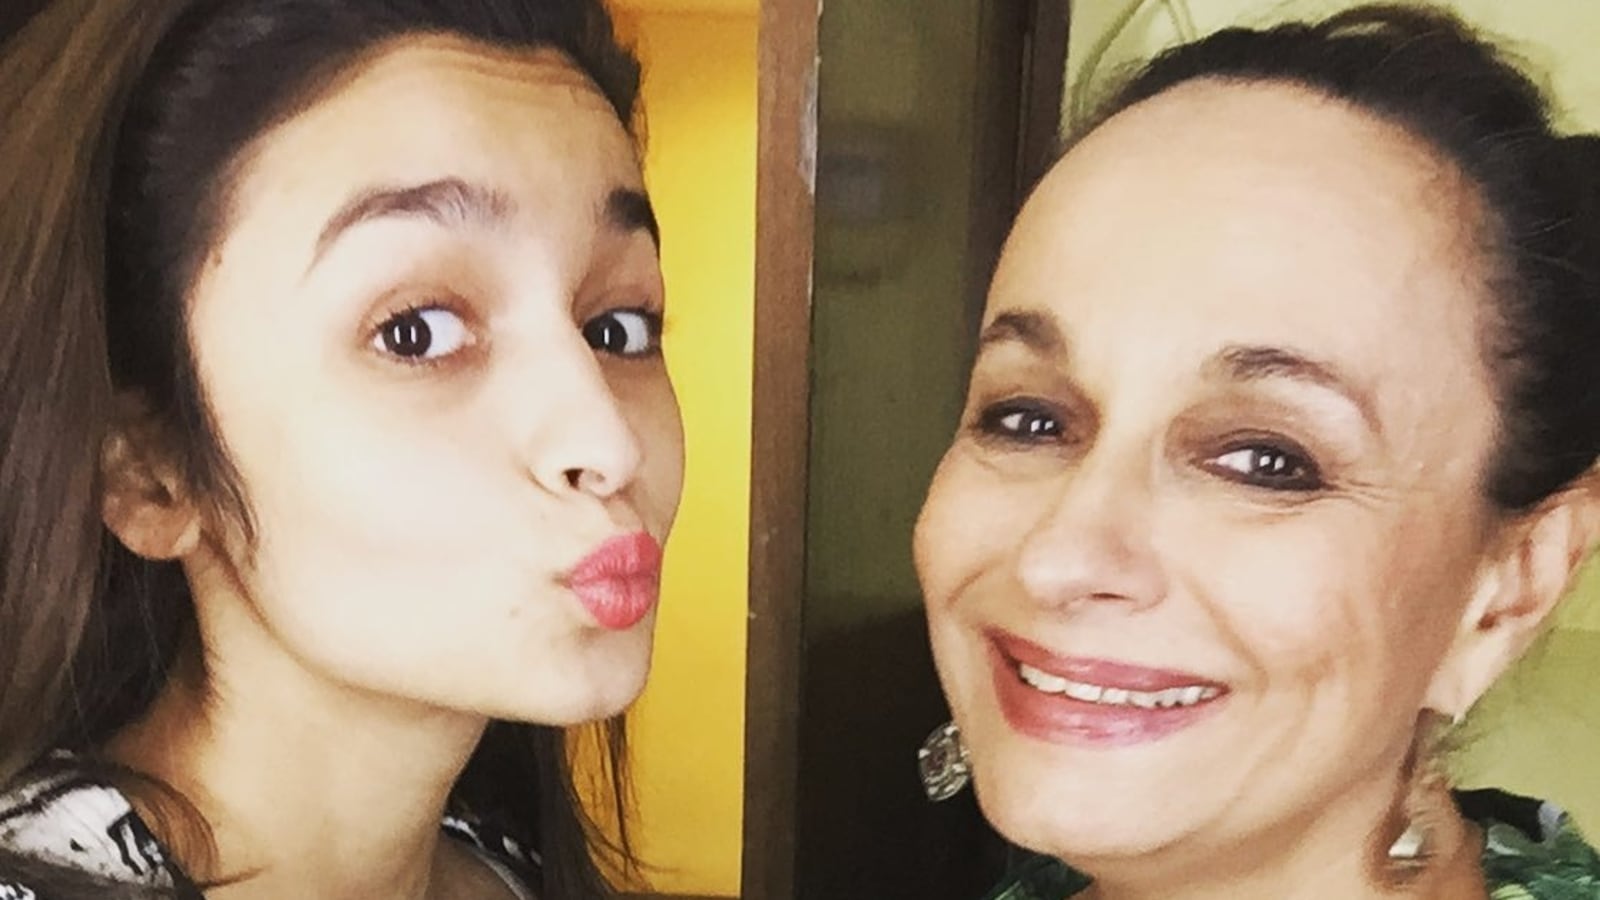 Alia Bhatt Ke Boor - Alia Bhatt asks 'why am I making this face?', reacts to mom's old pic with  her | Bollywood - Hindustan Times